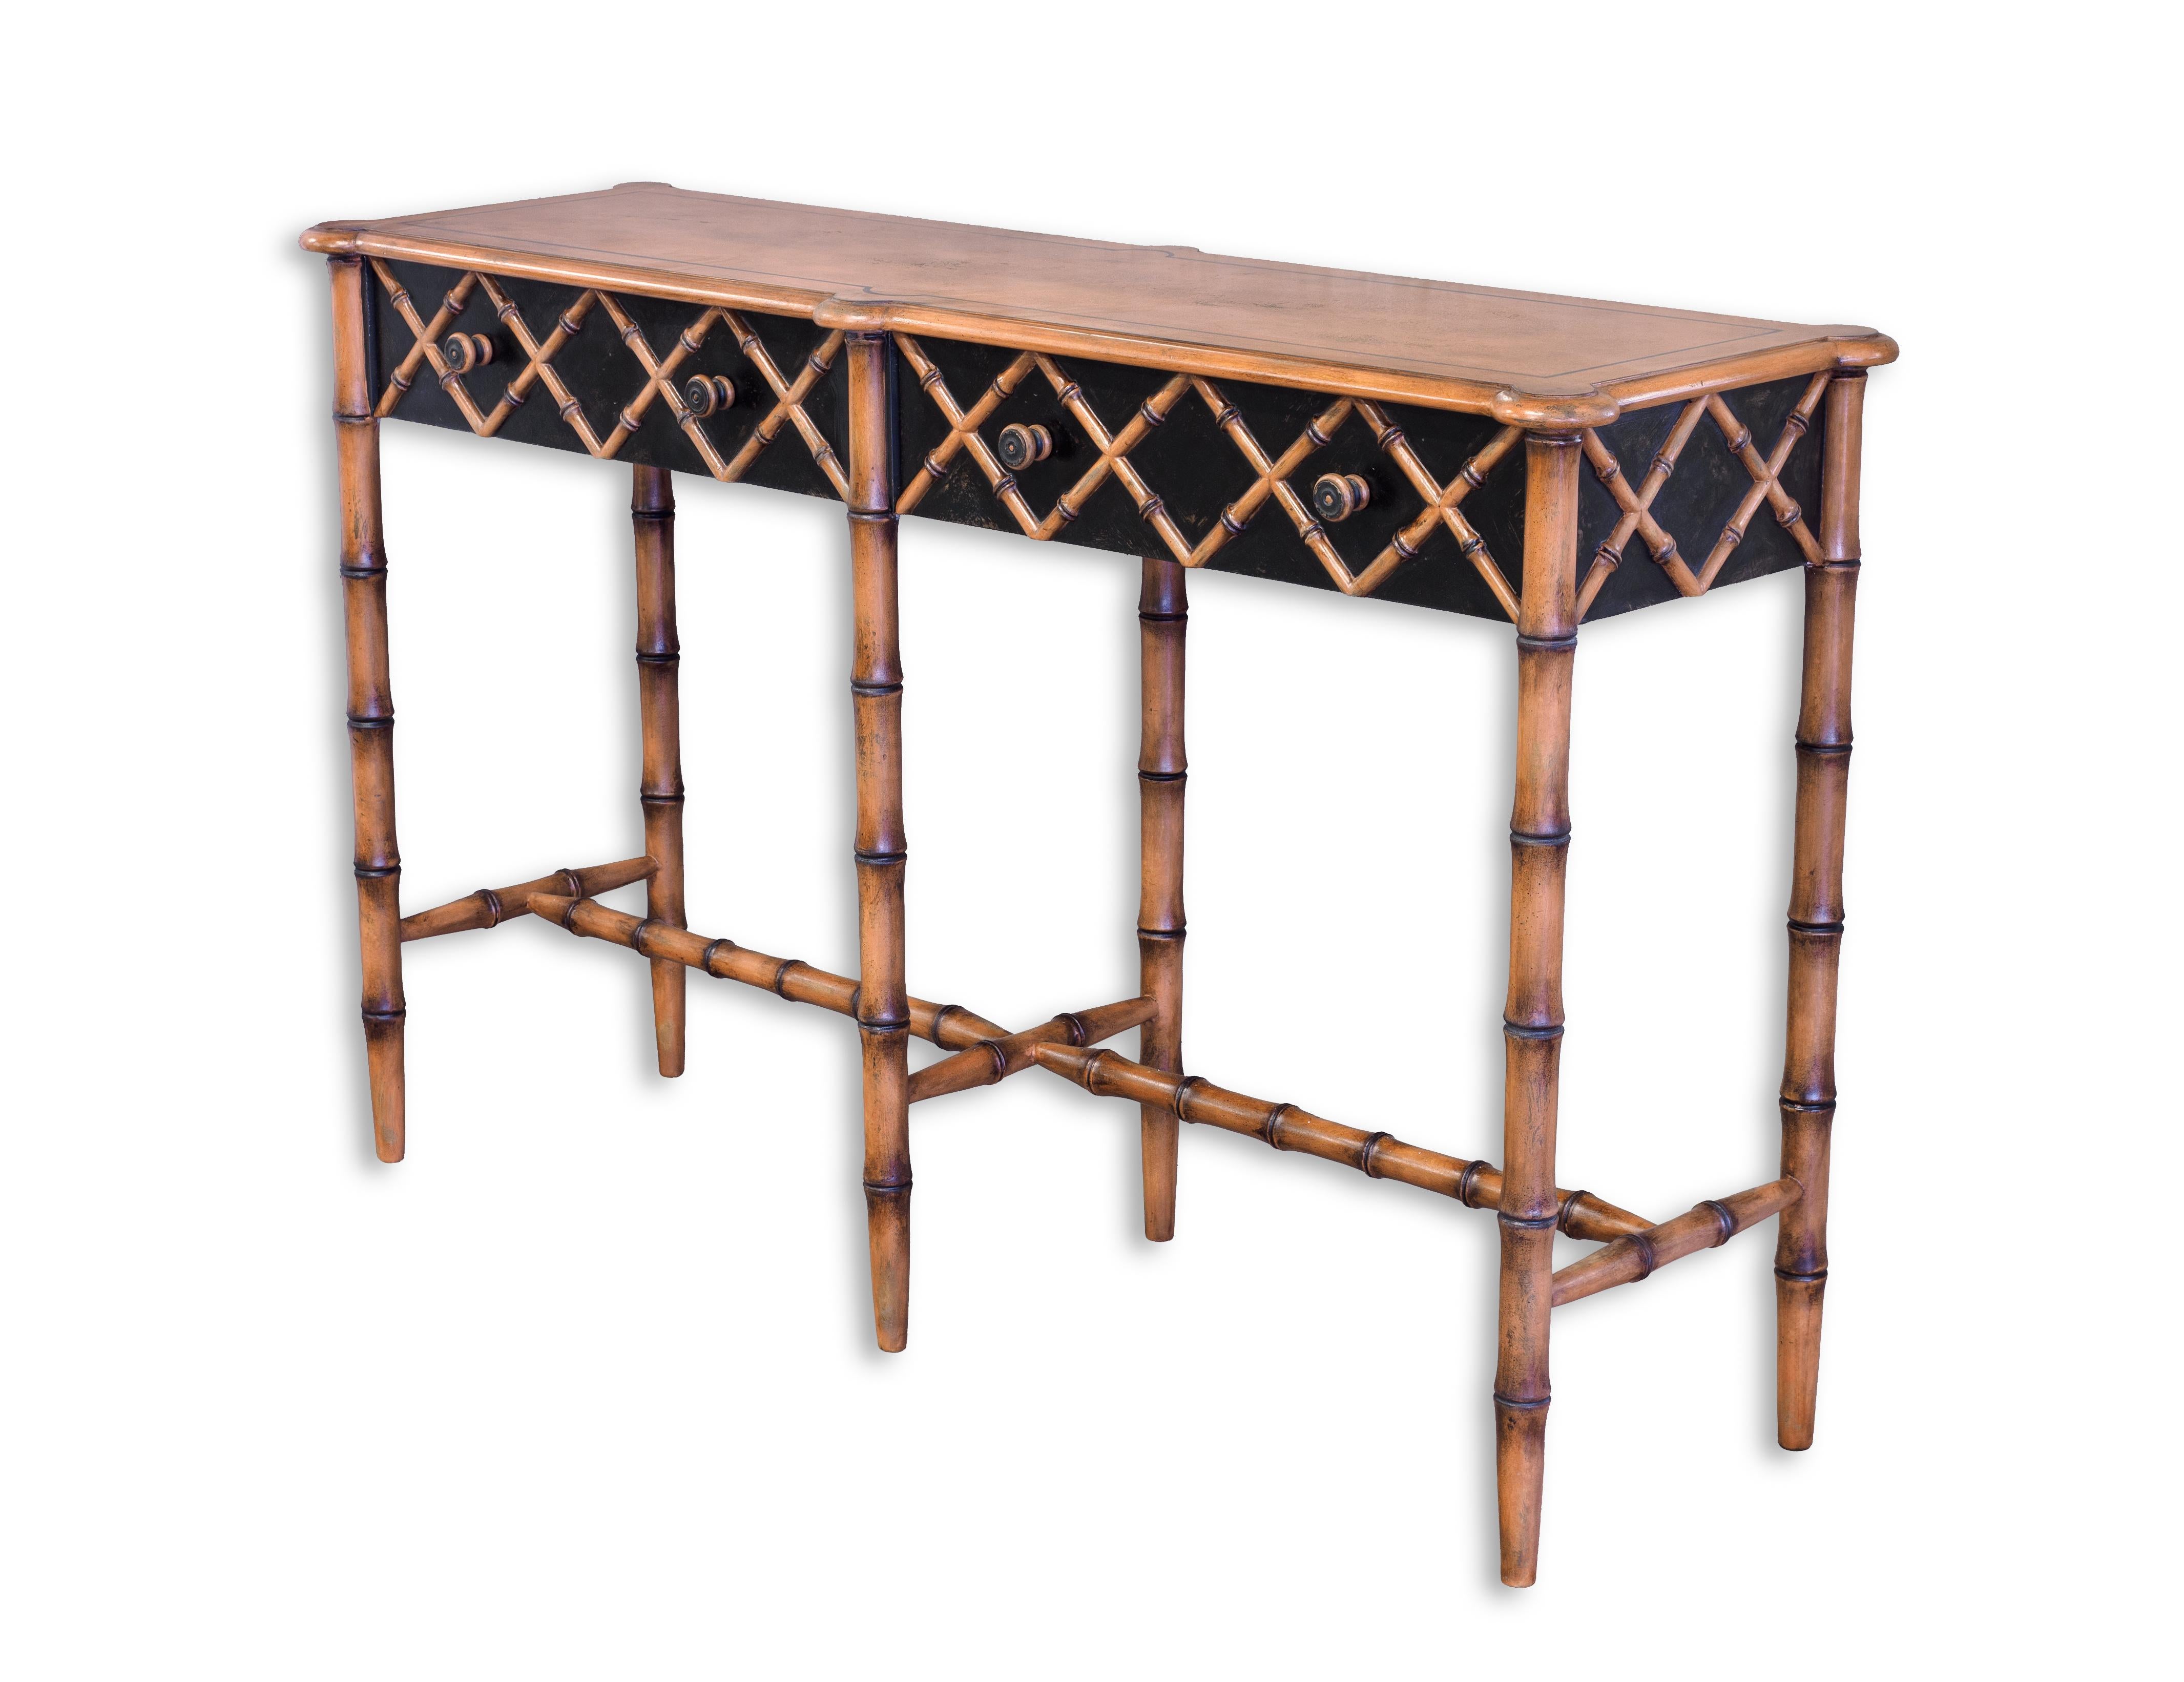 From our hand-painted Furniture Collection, we are pleased to introduce you to our Provenza Bamboo Console with drawers. 
Finished in a timeless black backround with bamboo criss cross accents, this eclectic console will surely add that touch of